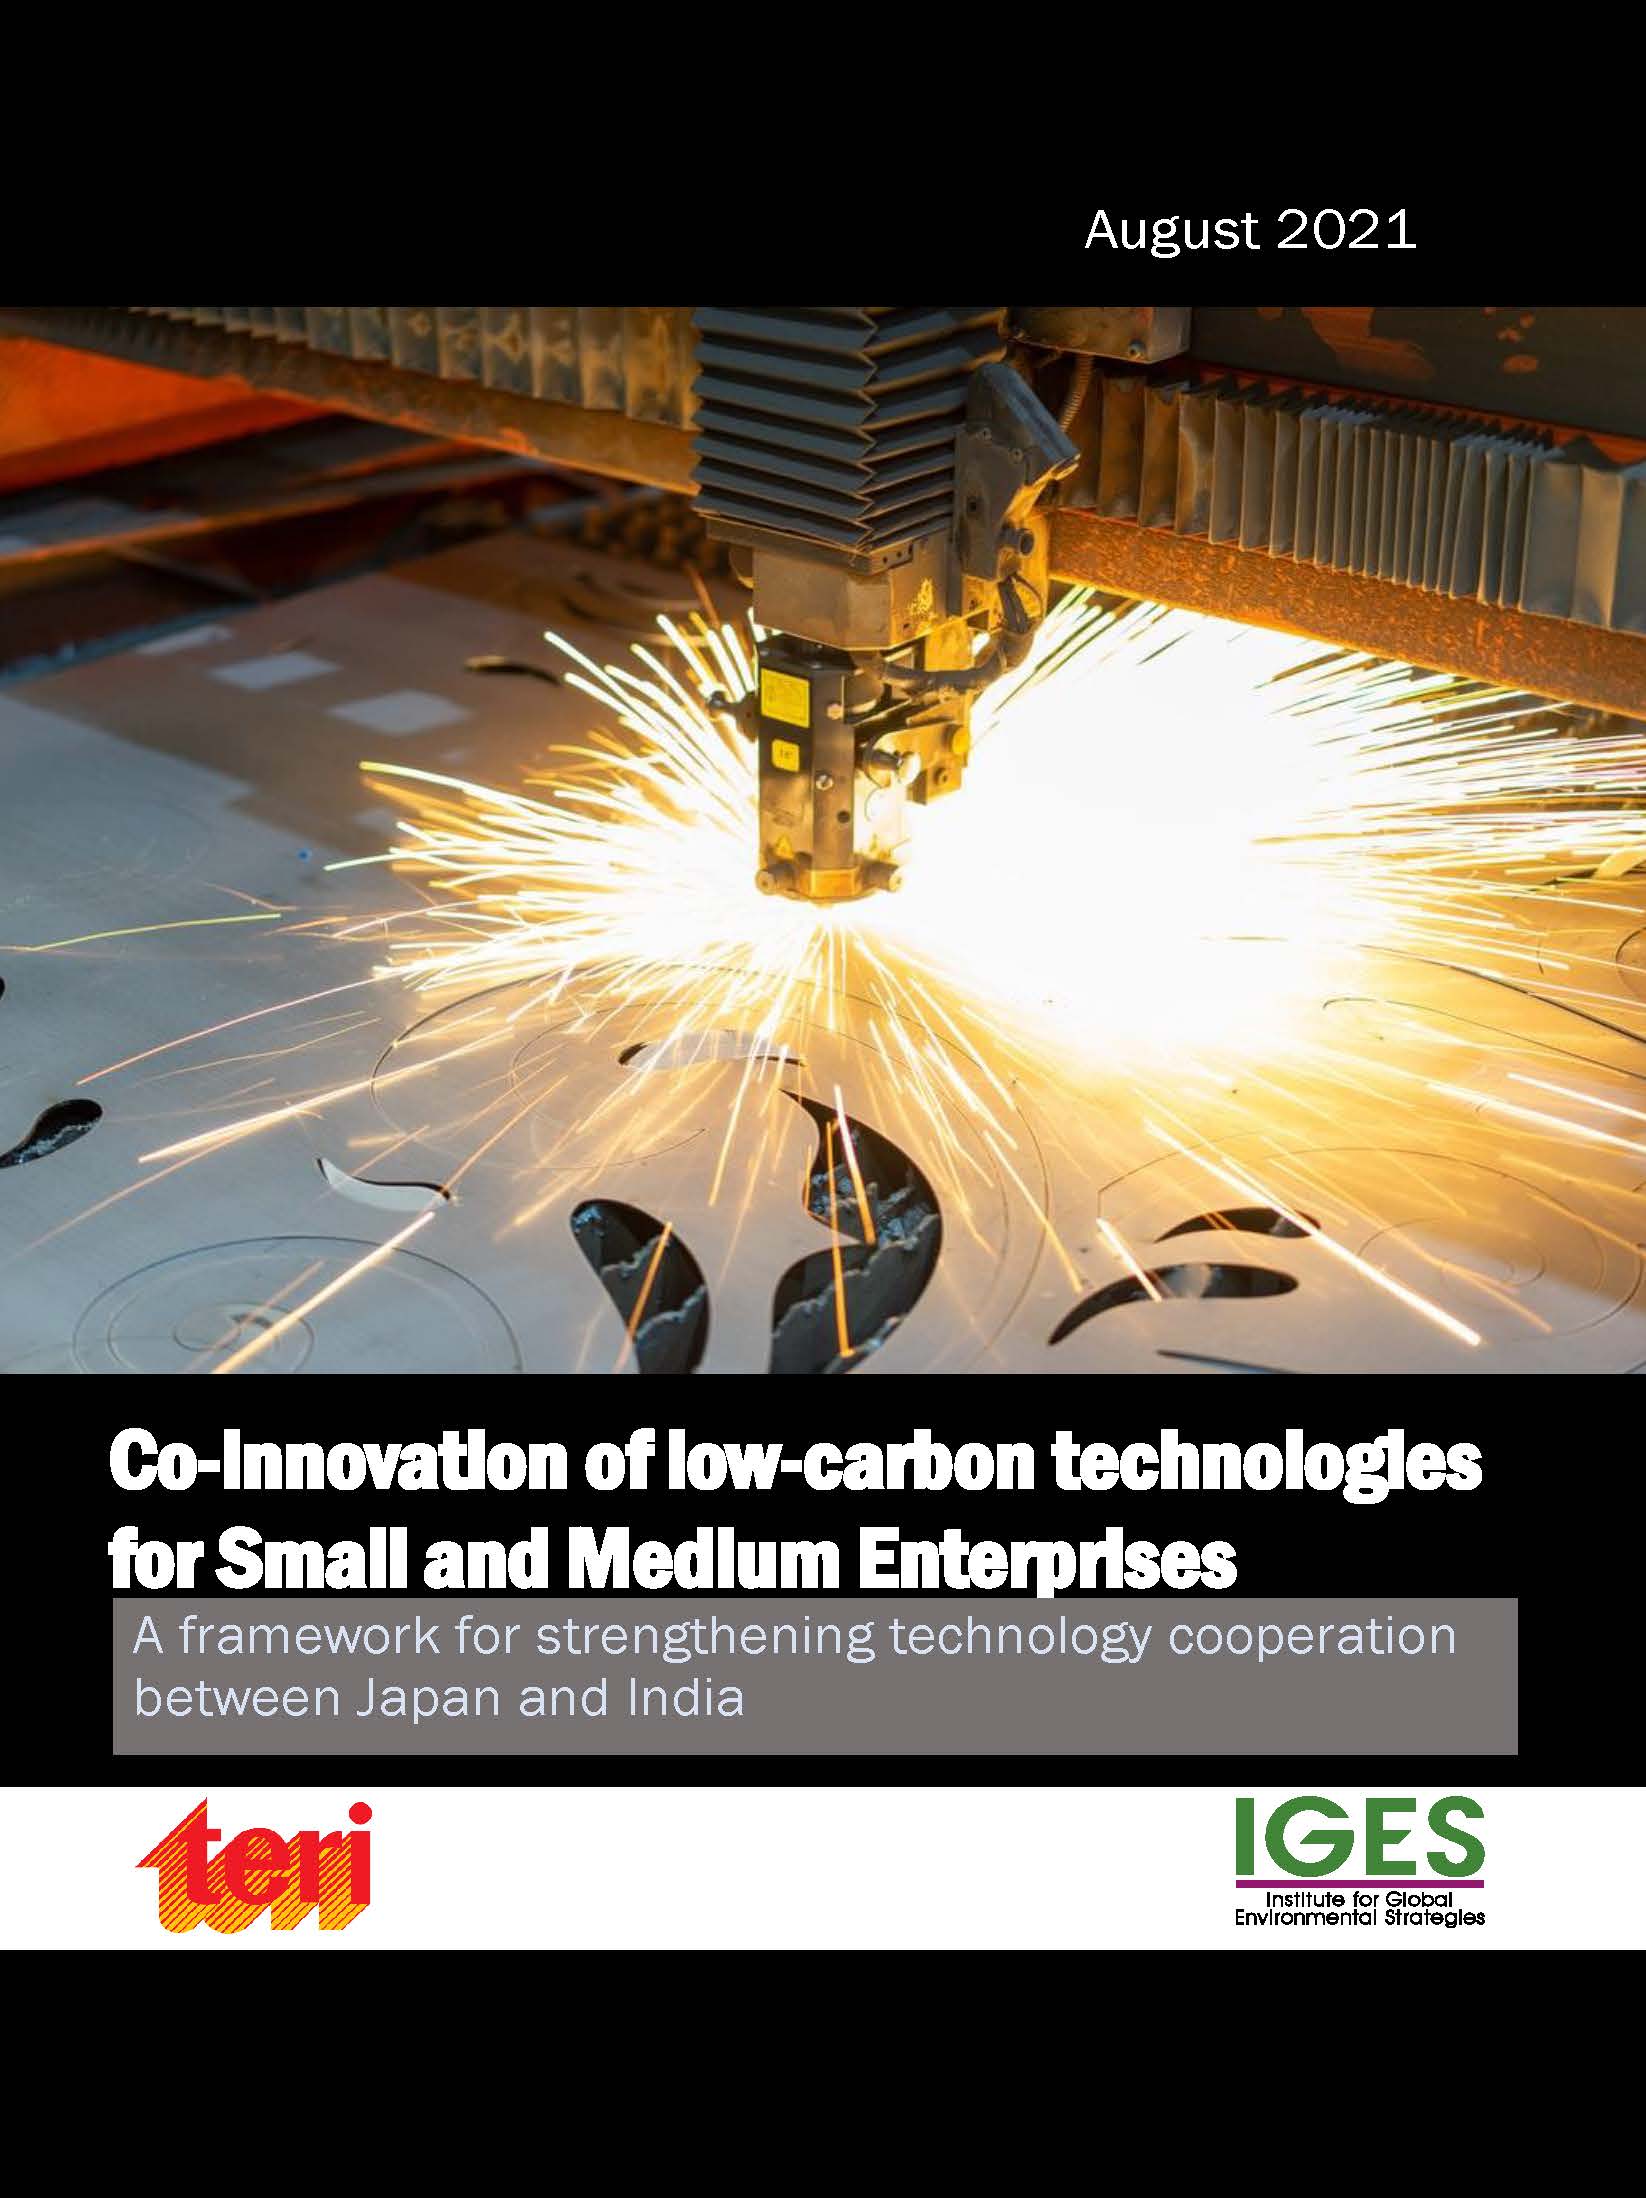 Co-innovation of low-carbon technologies for Small and Medium Enterprises